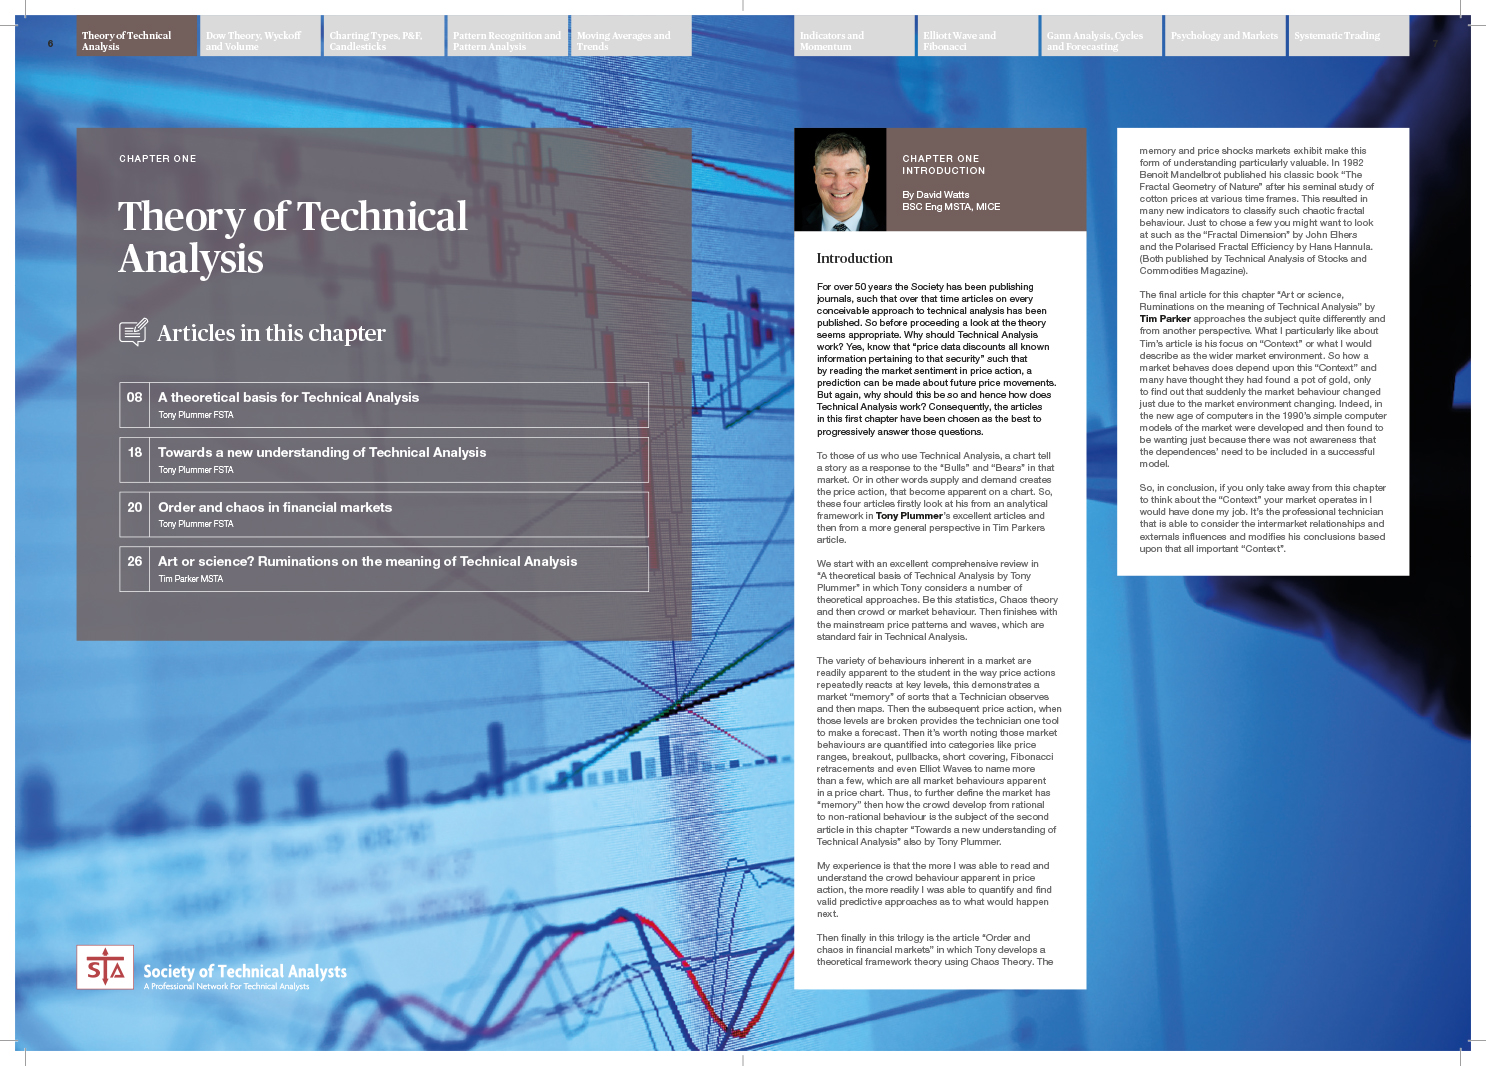 Society of Technical Analysts: Book